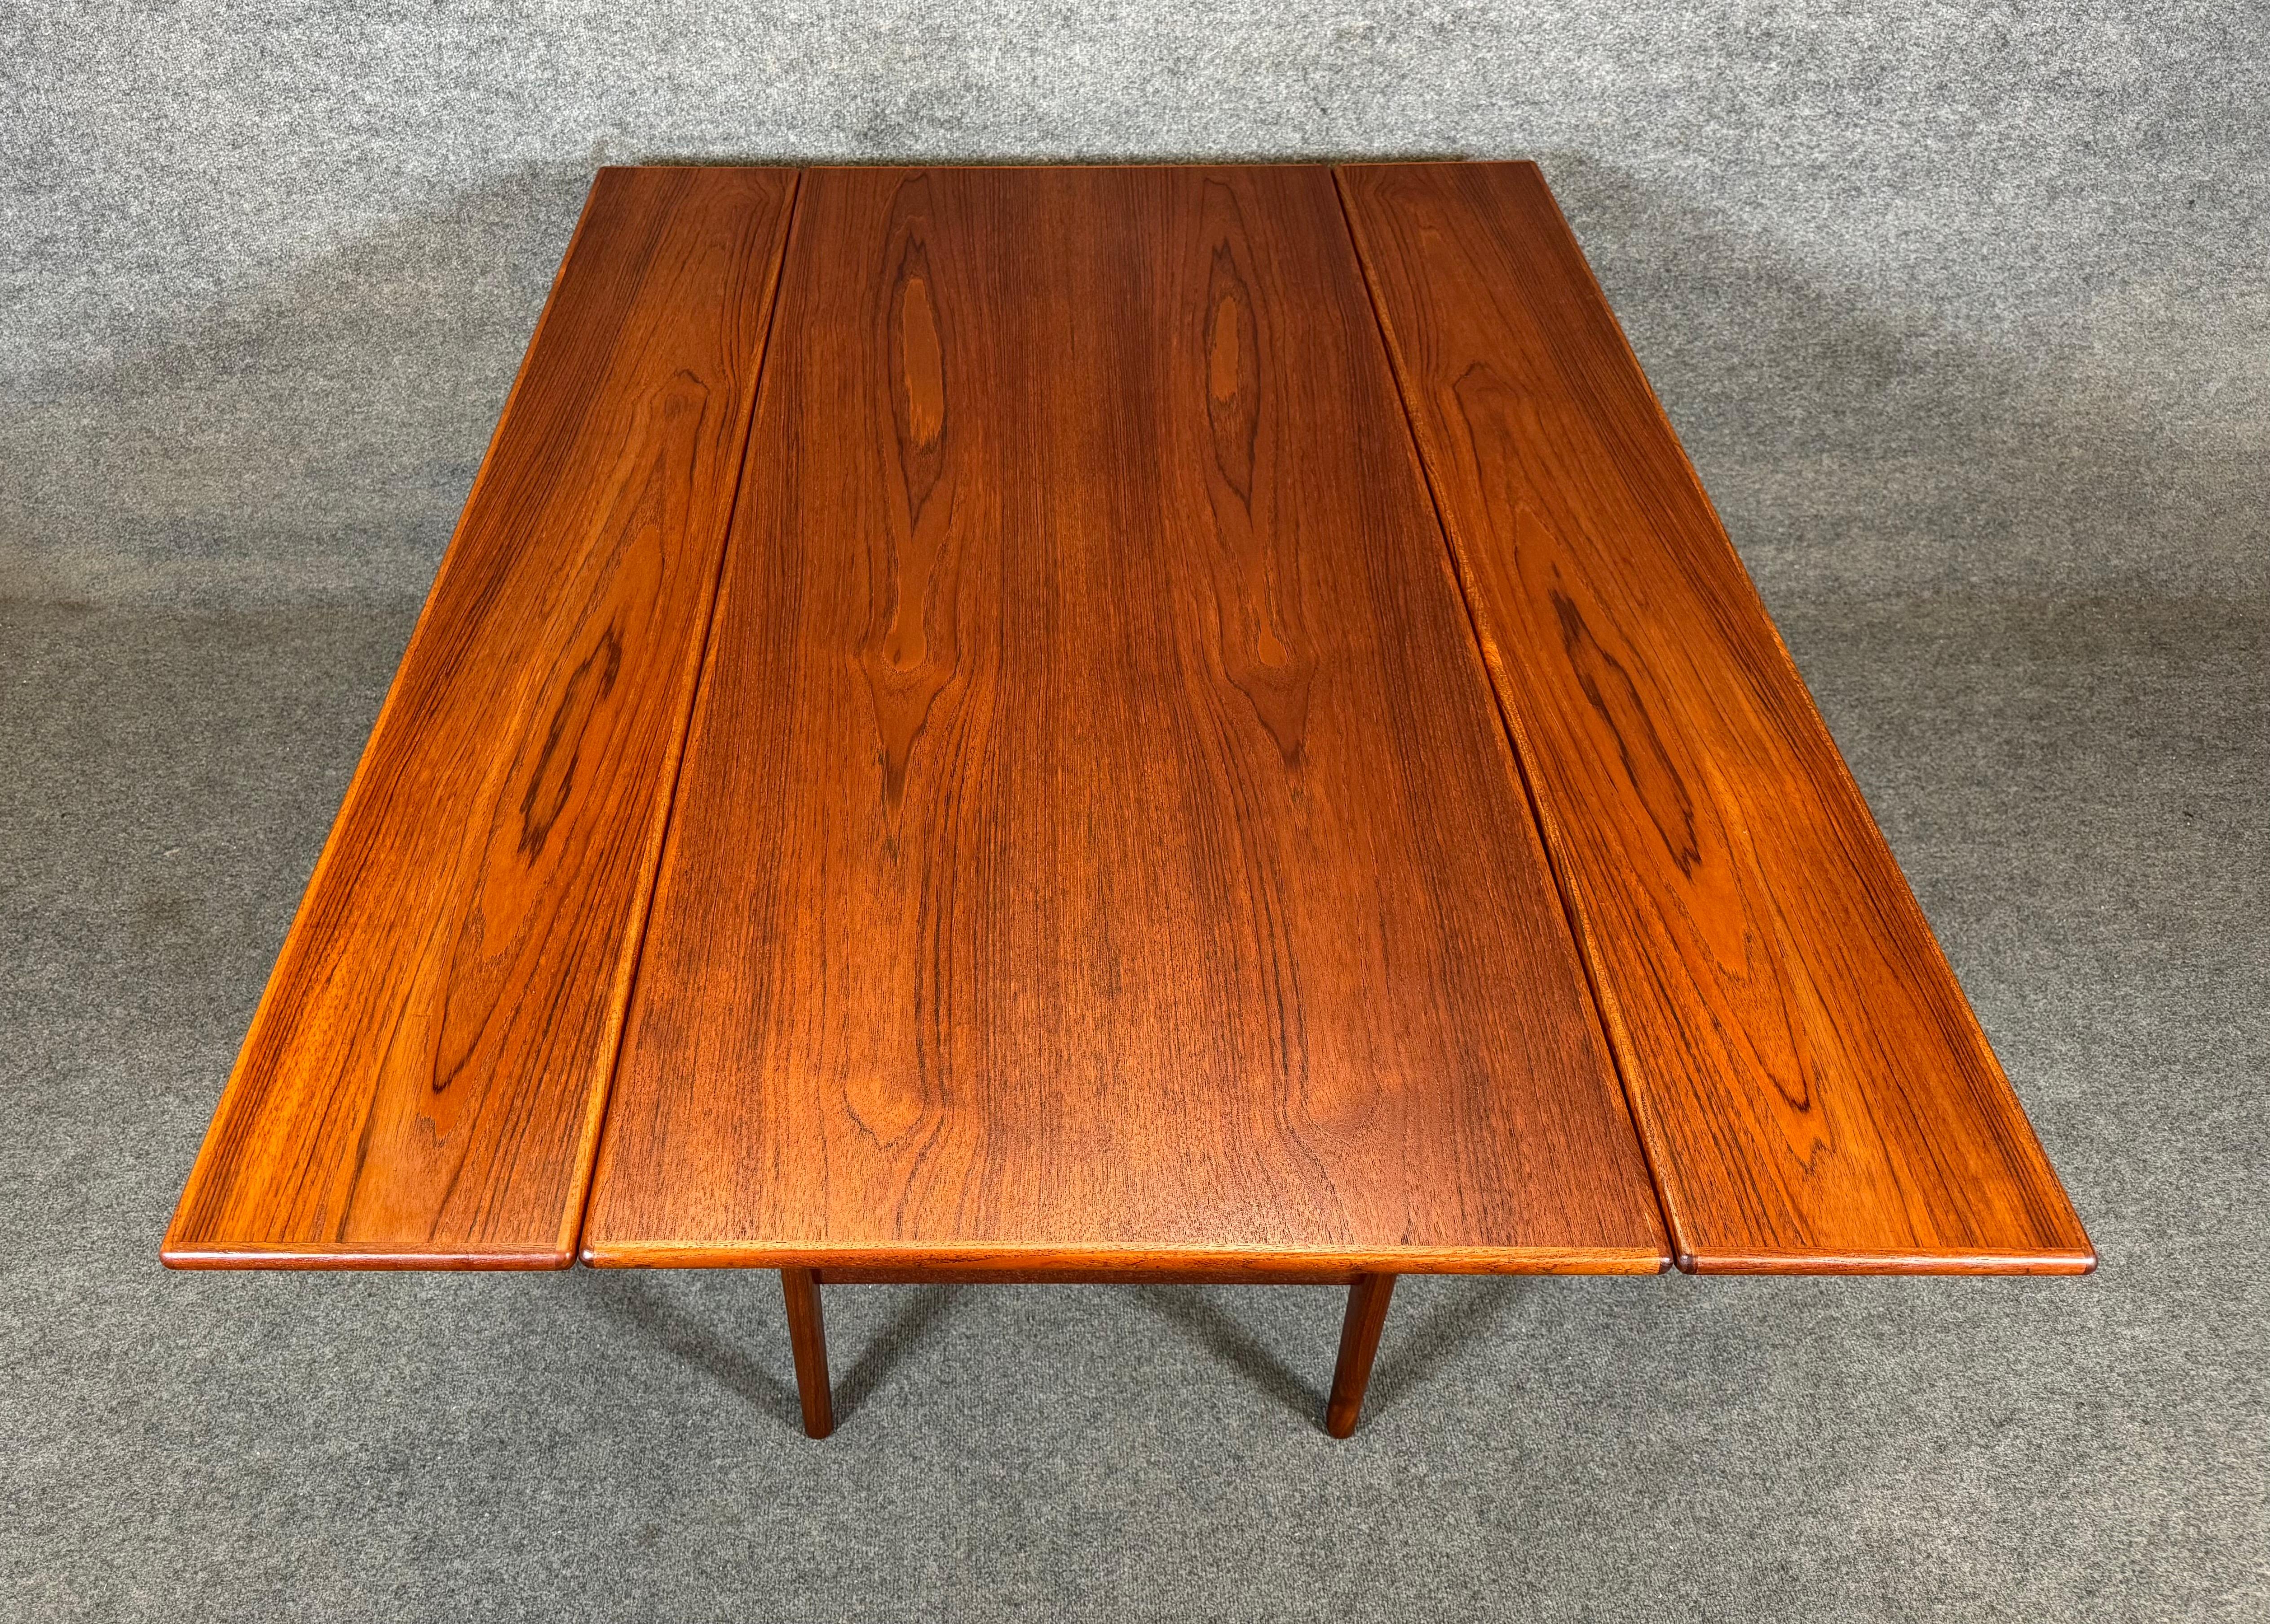 Here is a beautiful and clever scandinavian modern elevator coffee-dining table in teak designed by Kai Kristiansen and manufactured by Vildbjerg Møbelfabrik in Denmark in the 1960's.
This exquisite table, recently imported from Europe to California